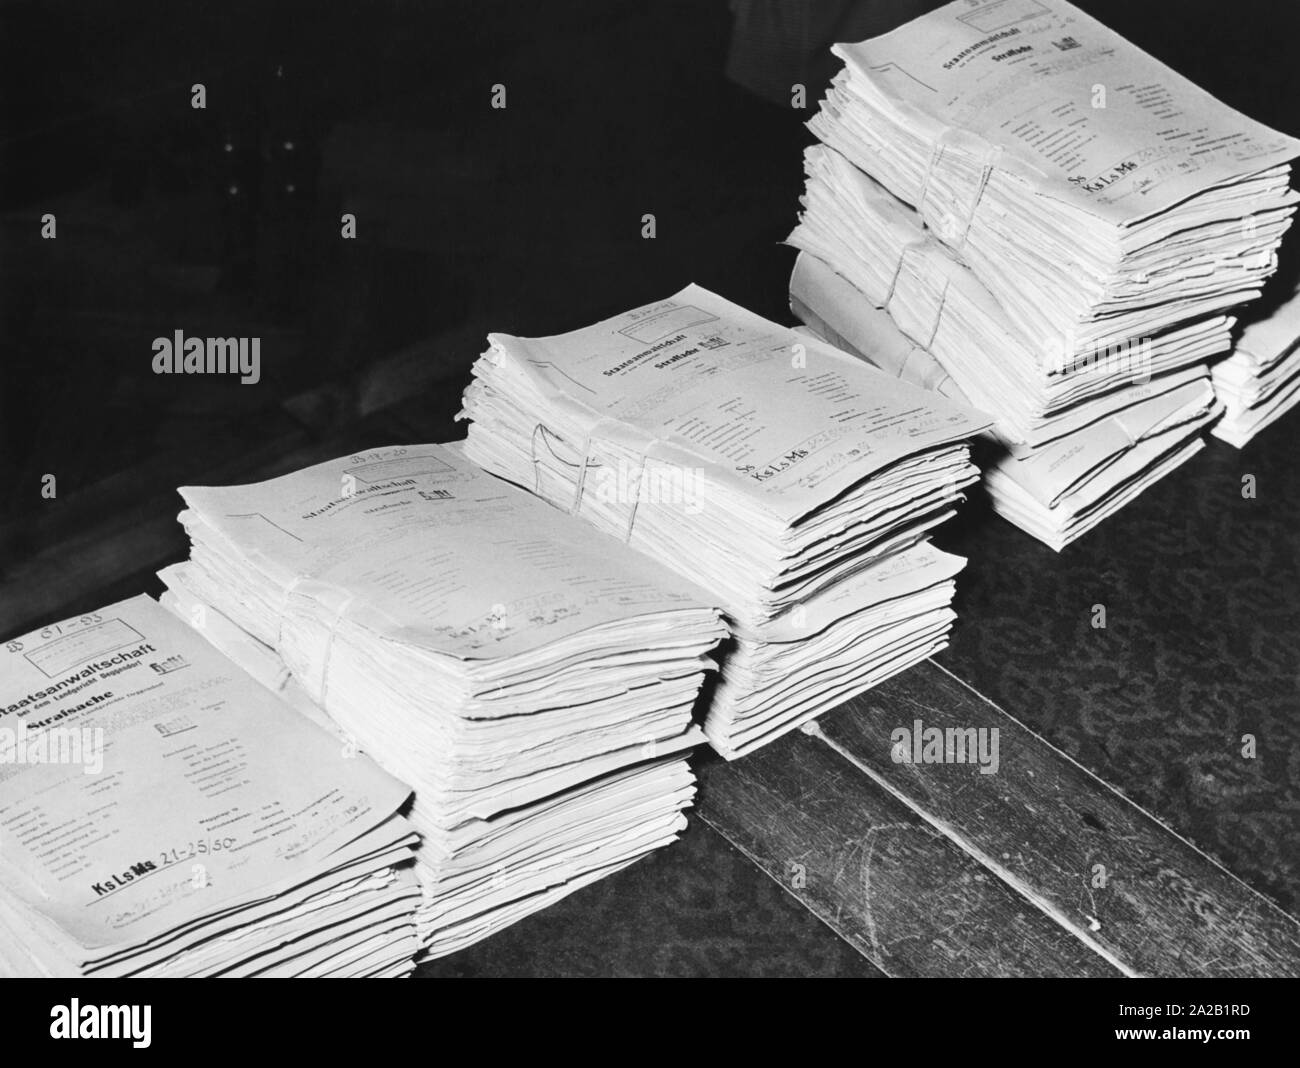 The records in the money counterfeiting process are piled up in front of the Deggendorf district court. Stock Photo